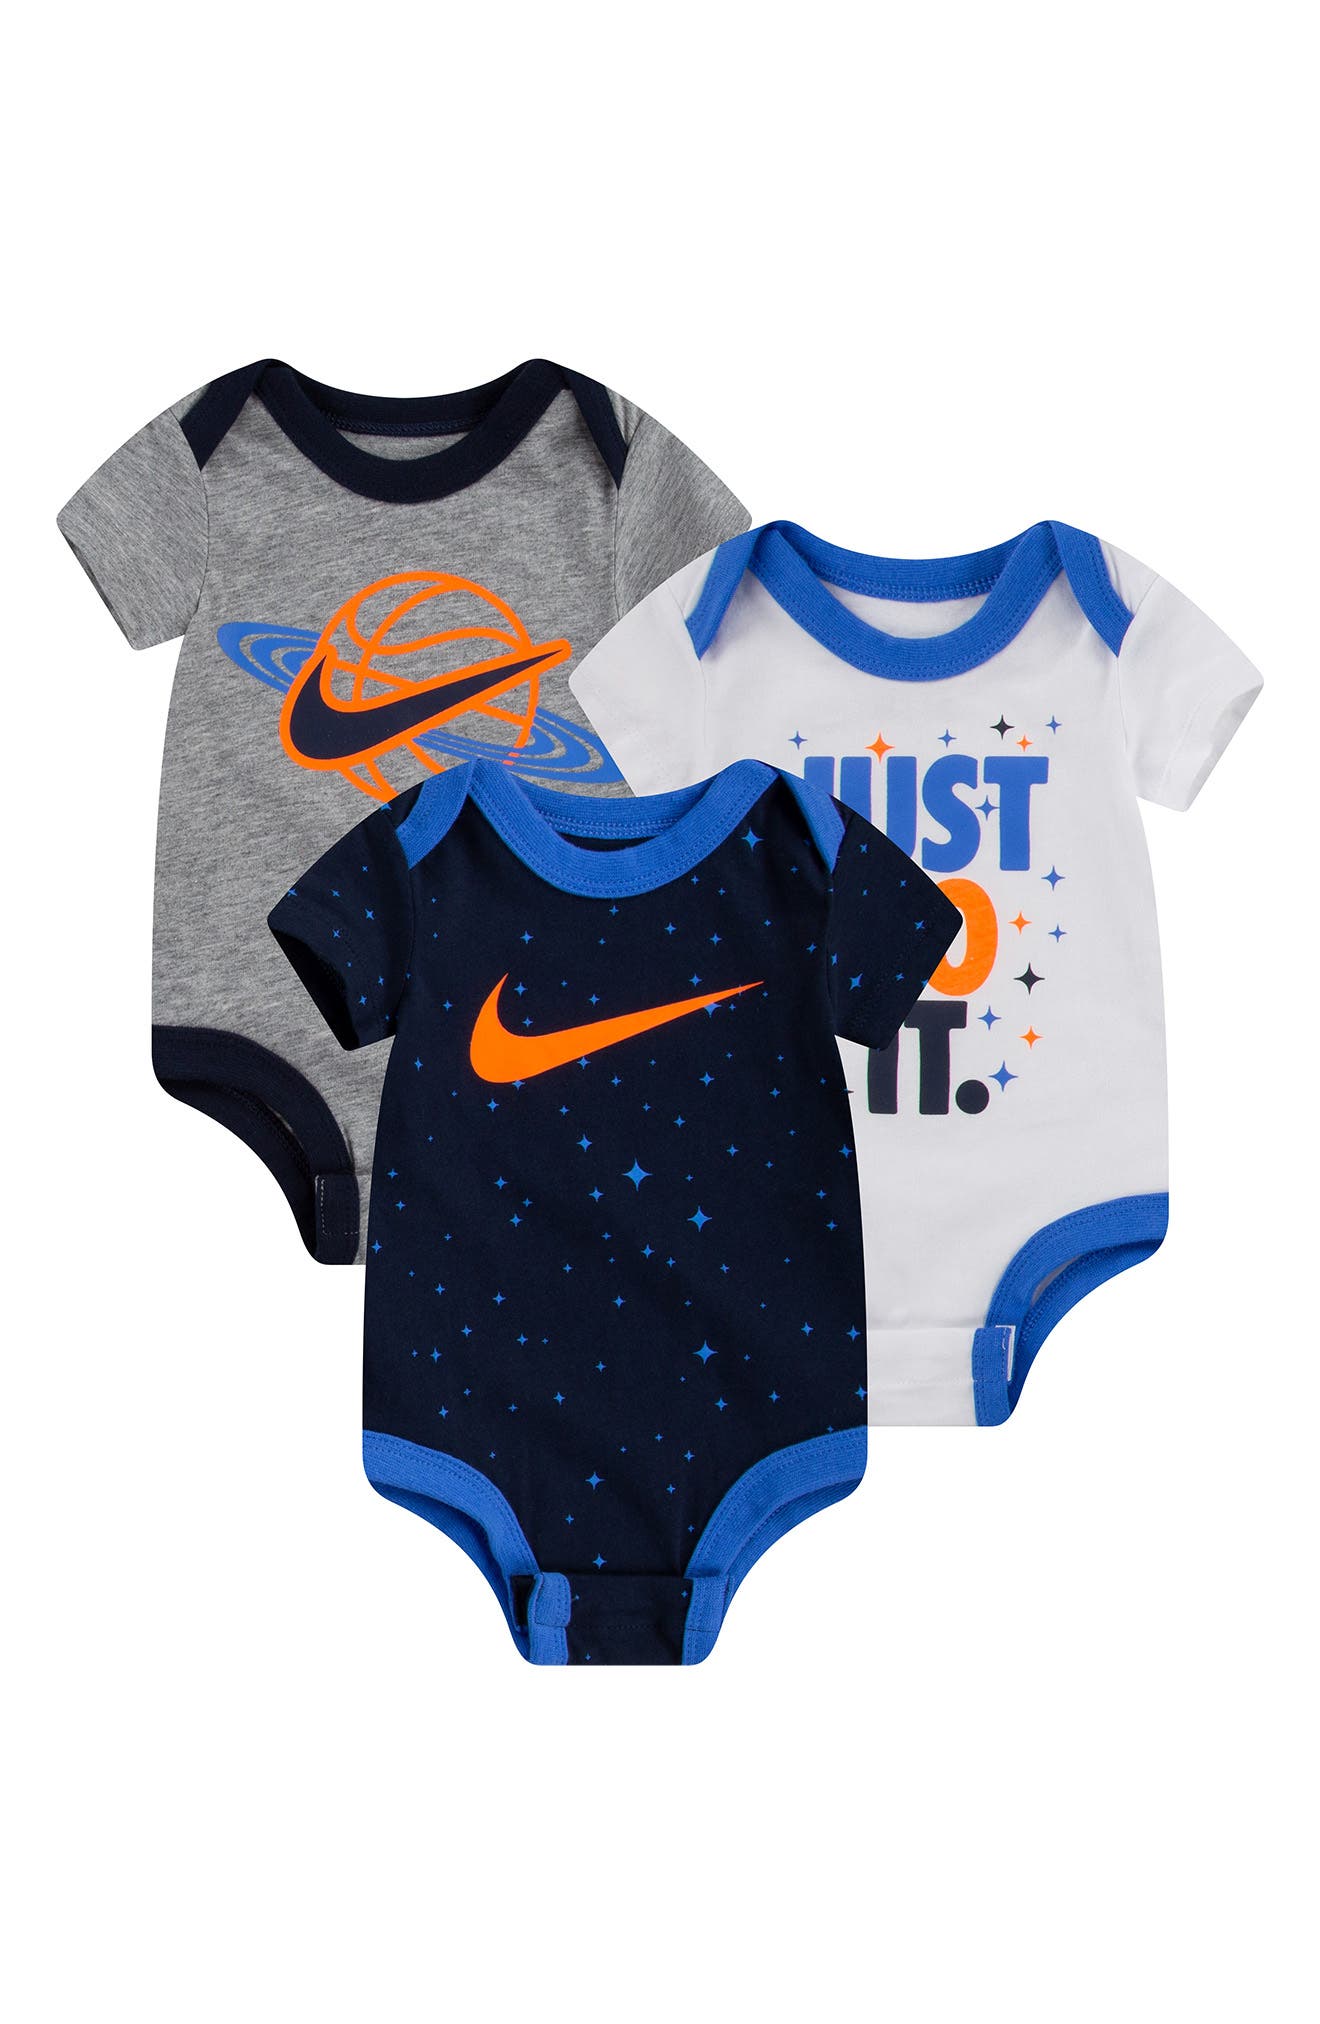 All Baby Boy Nike Clothes | Nordstrom